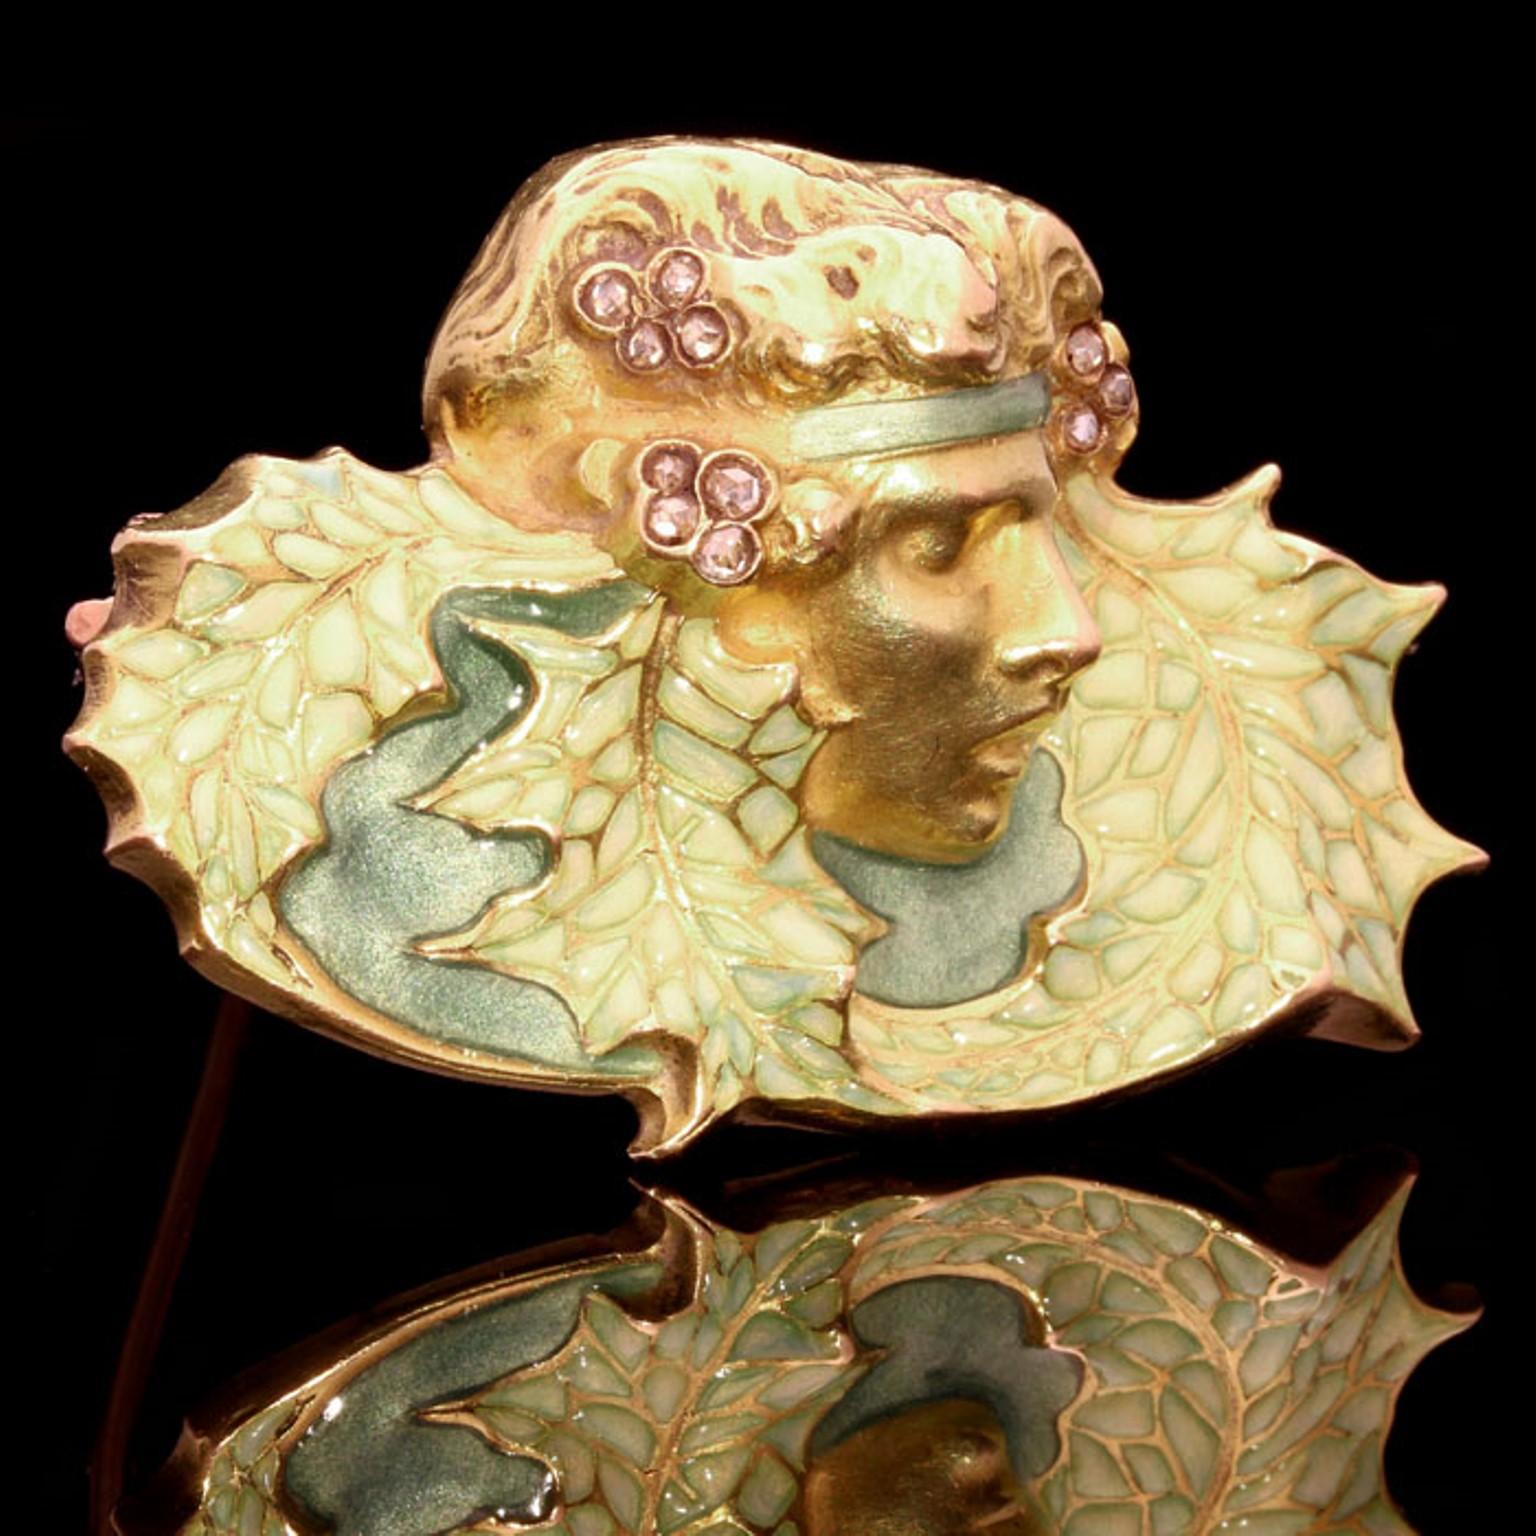 ART NOUVEAU GOLD, DIAMOND & ENAMEL BROOCH BY RENE LALIQUE c.1900
Modelled as the head of a woman 'wood nymph' with rose-cut diamond-set pale green translucent enamel bandeau surrounded by matching enamel stylised leaves, the reverse with pale green